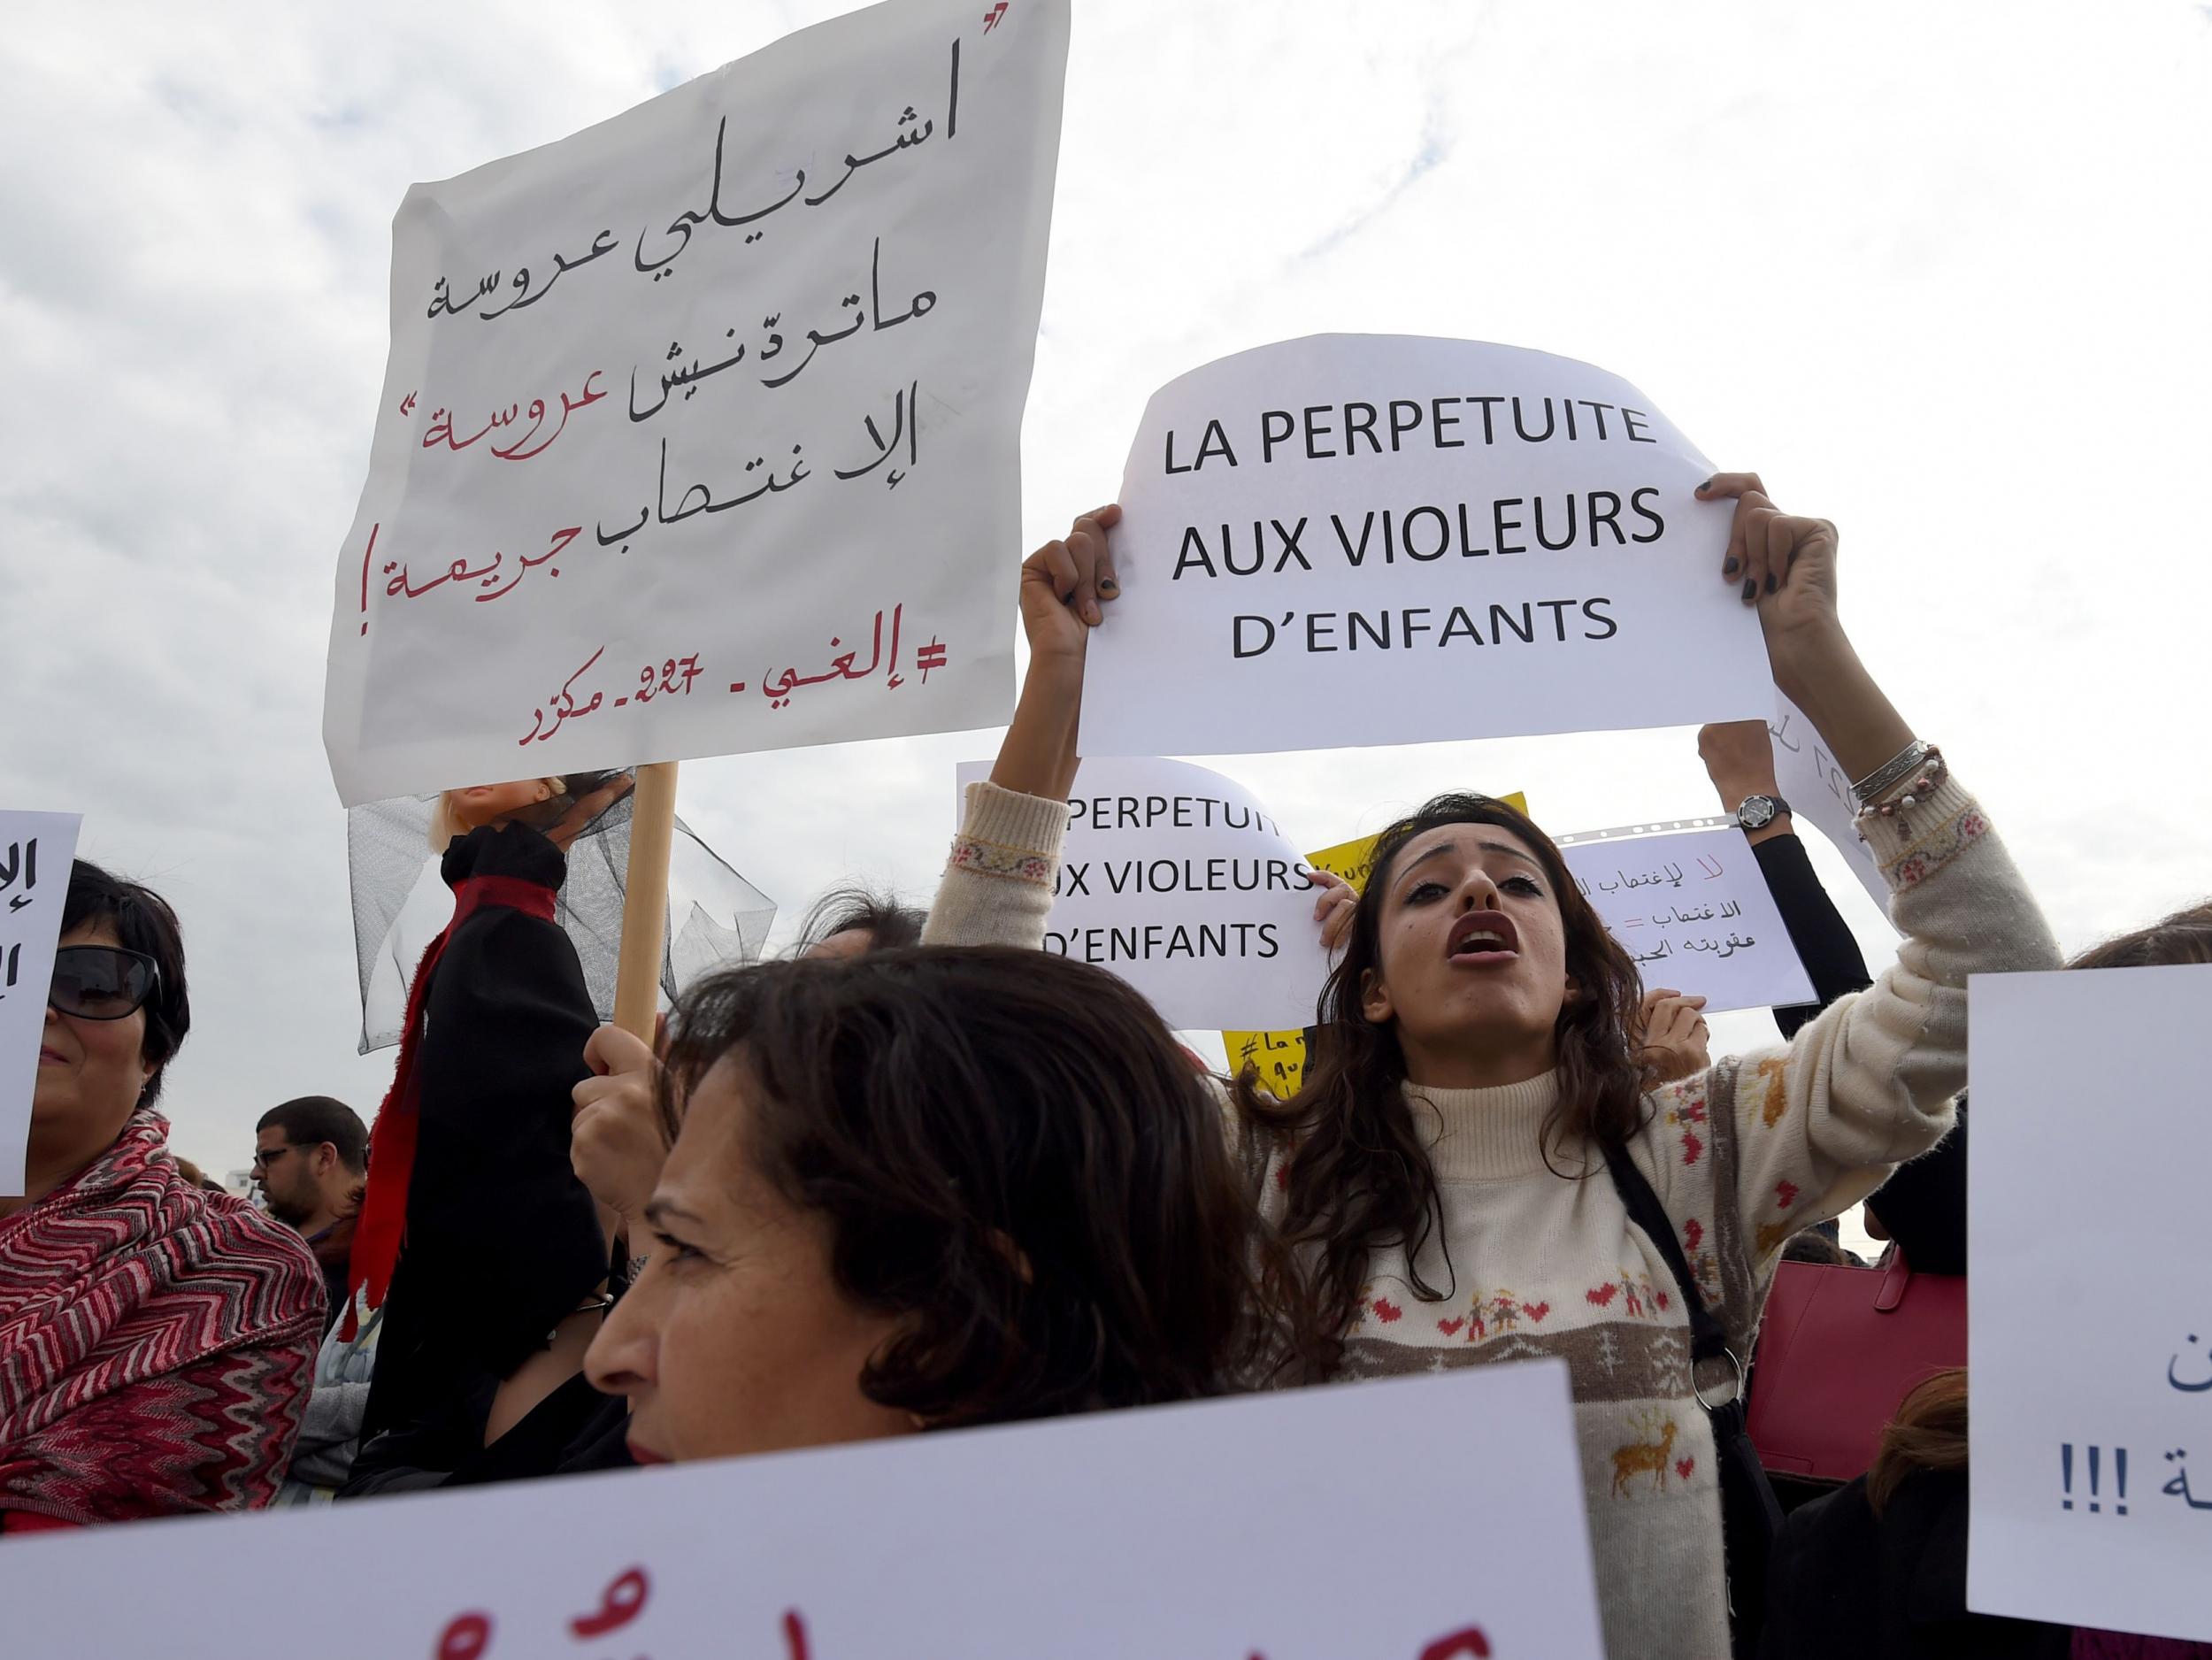 Court’s decision has enraged Tunisians who demonstrated outside parliament